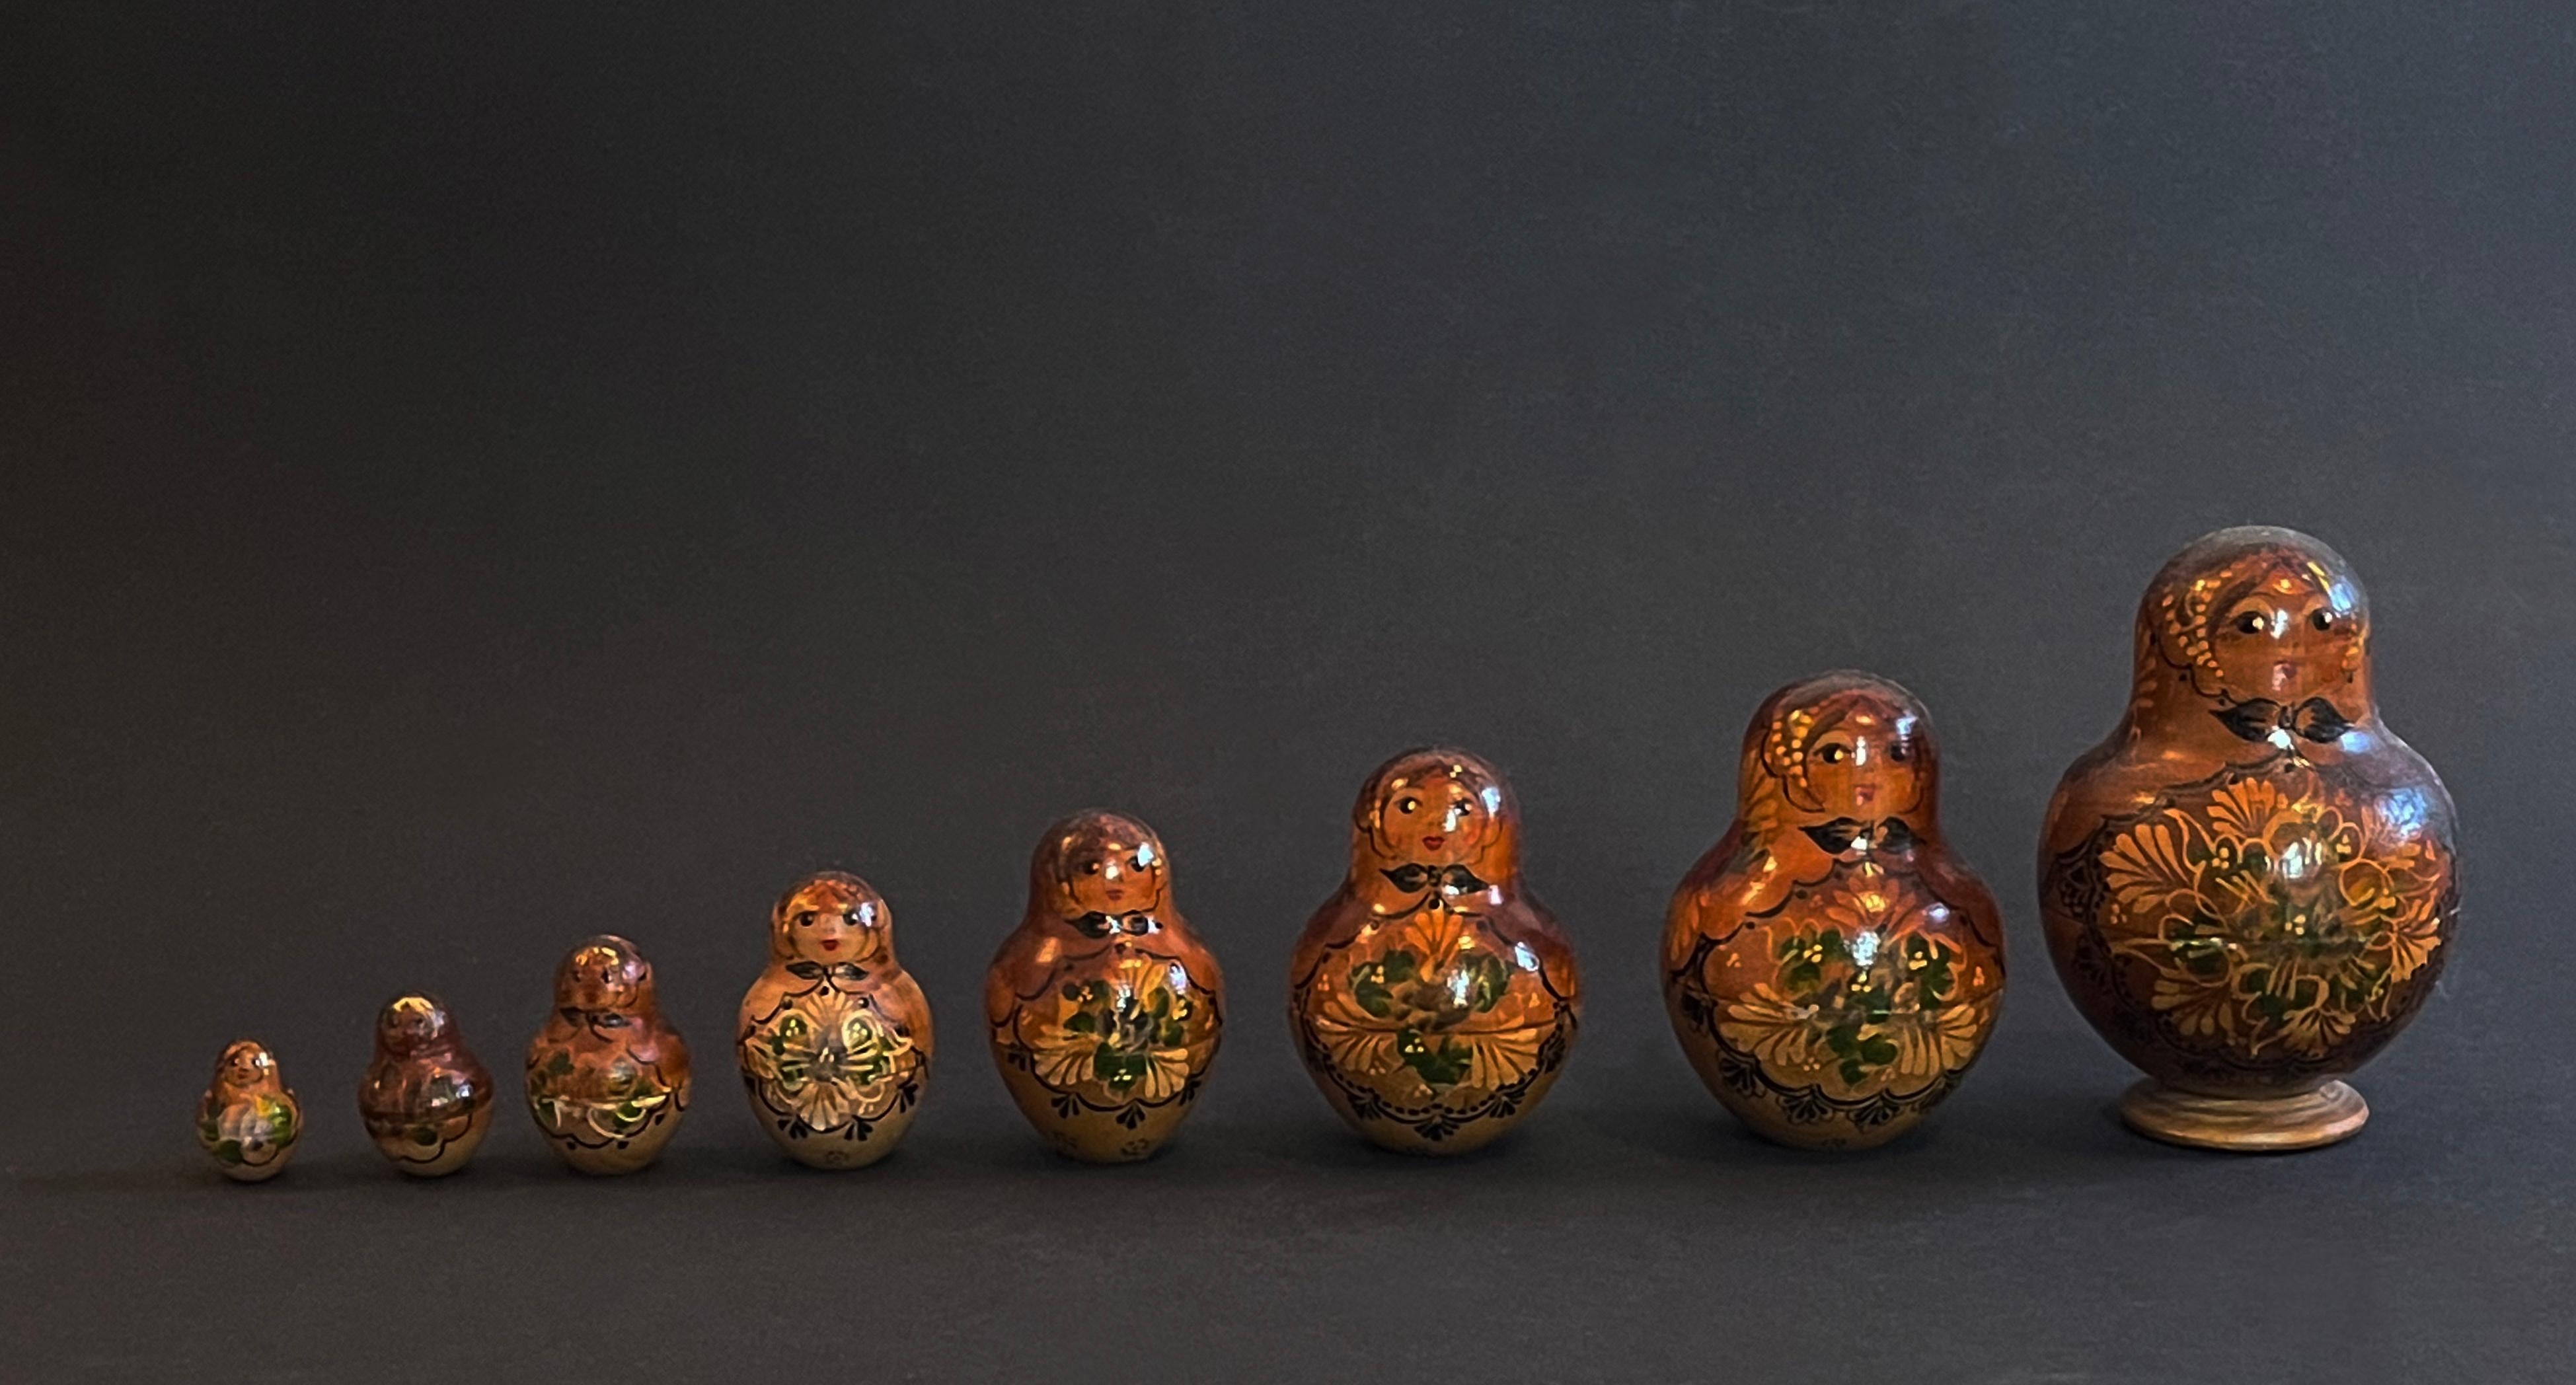 Antique set of 8 Nesting Dolls, known as Matryoshka, placed in the 1920s to 1950s.
The original set contained of 10, the 2 smallest have gone travelling the world!
Completely hand crafted, turned by hand, with the largest doll even supplied with a